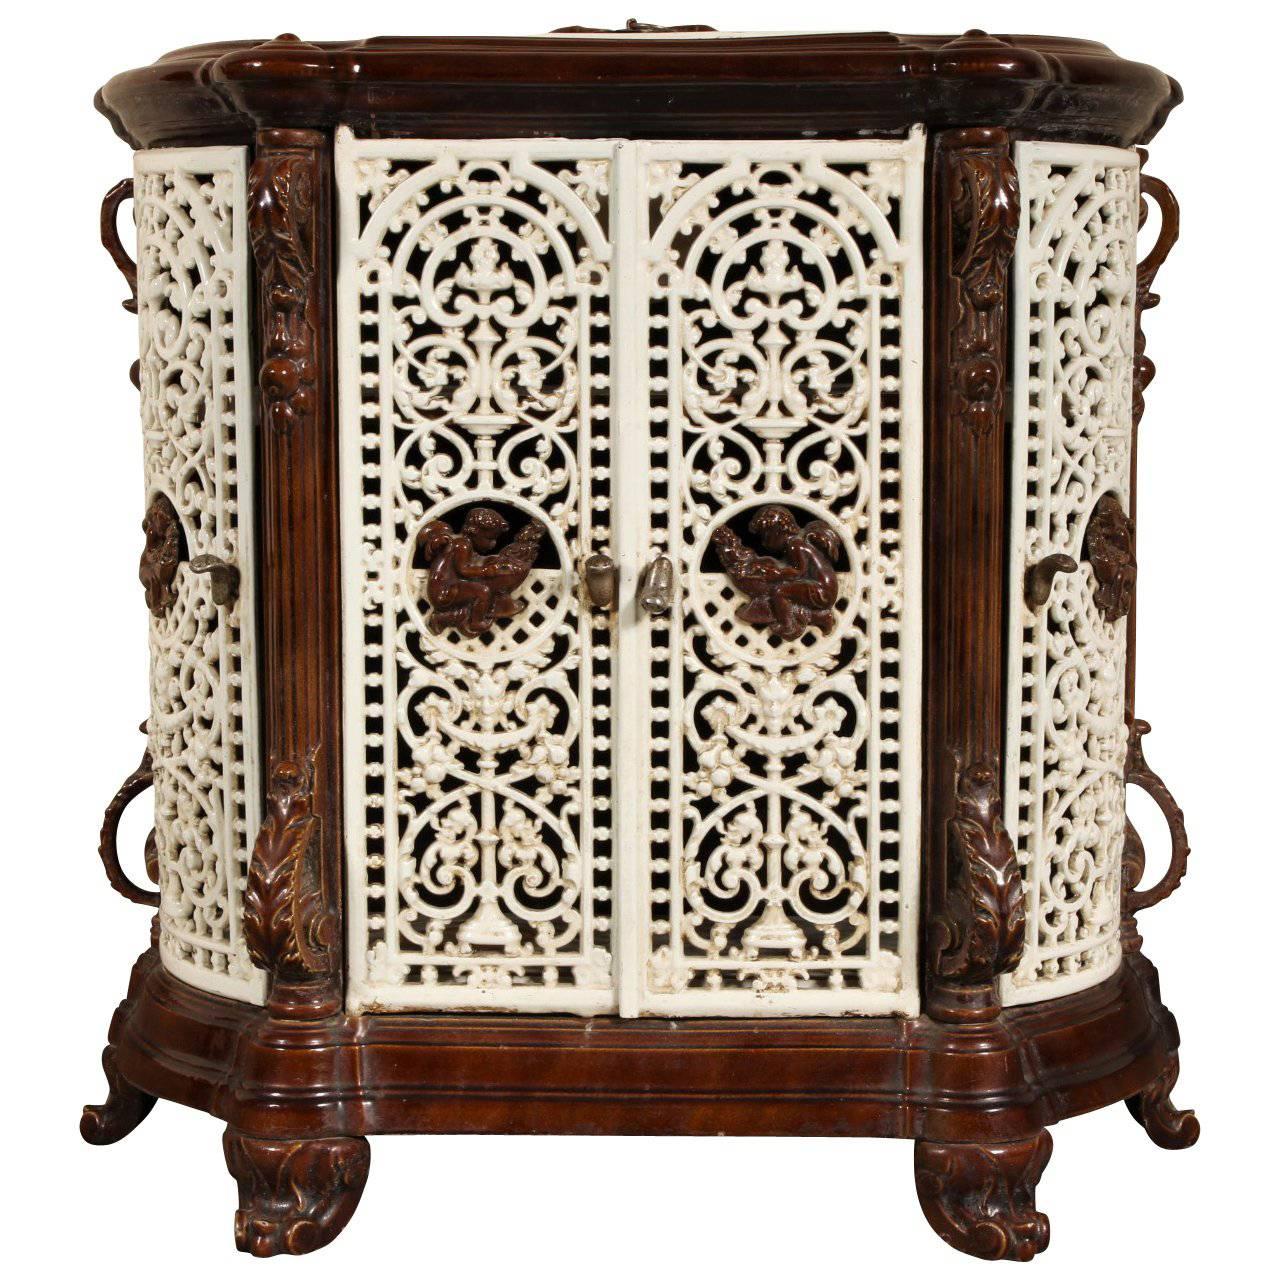 Antique French Enamel Cast Iron Room Heating Stove Repurposed as a Cabinet